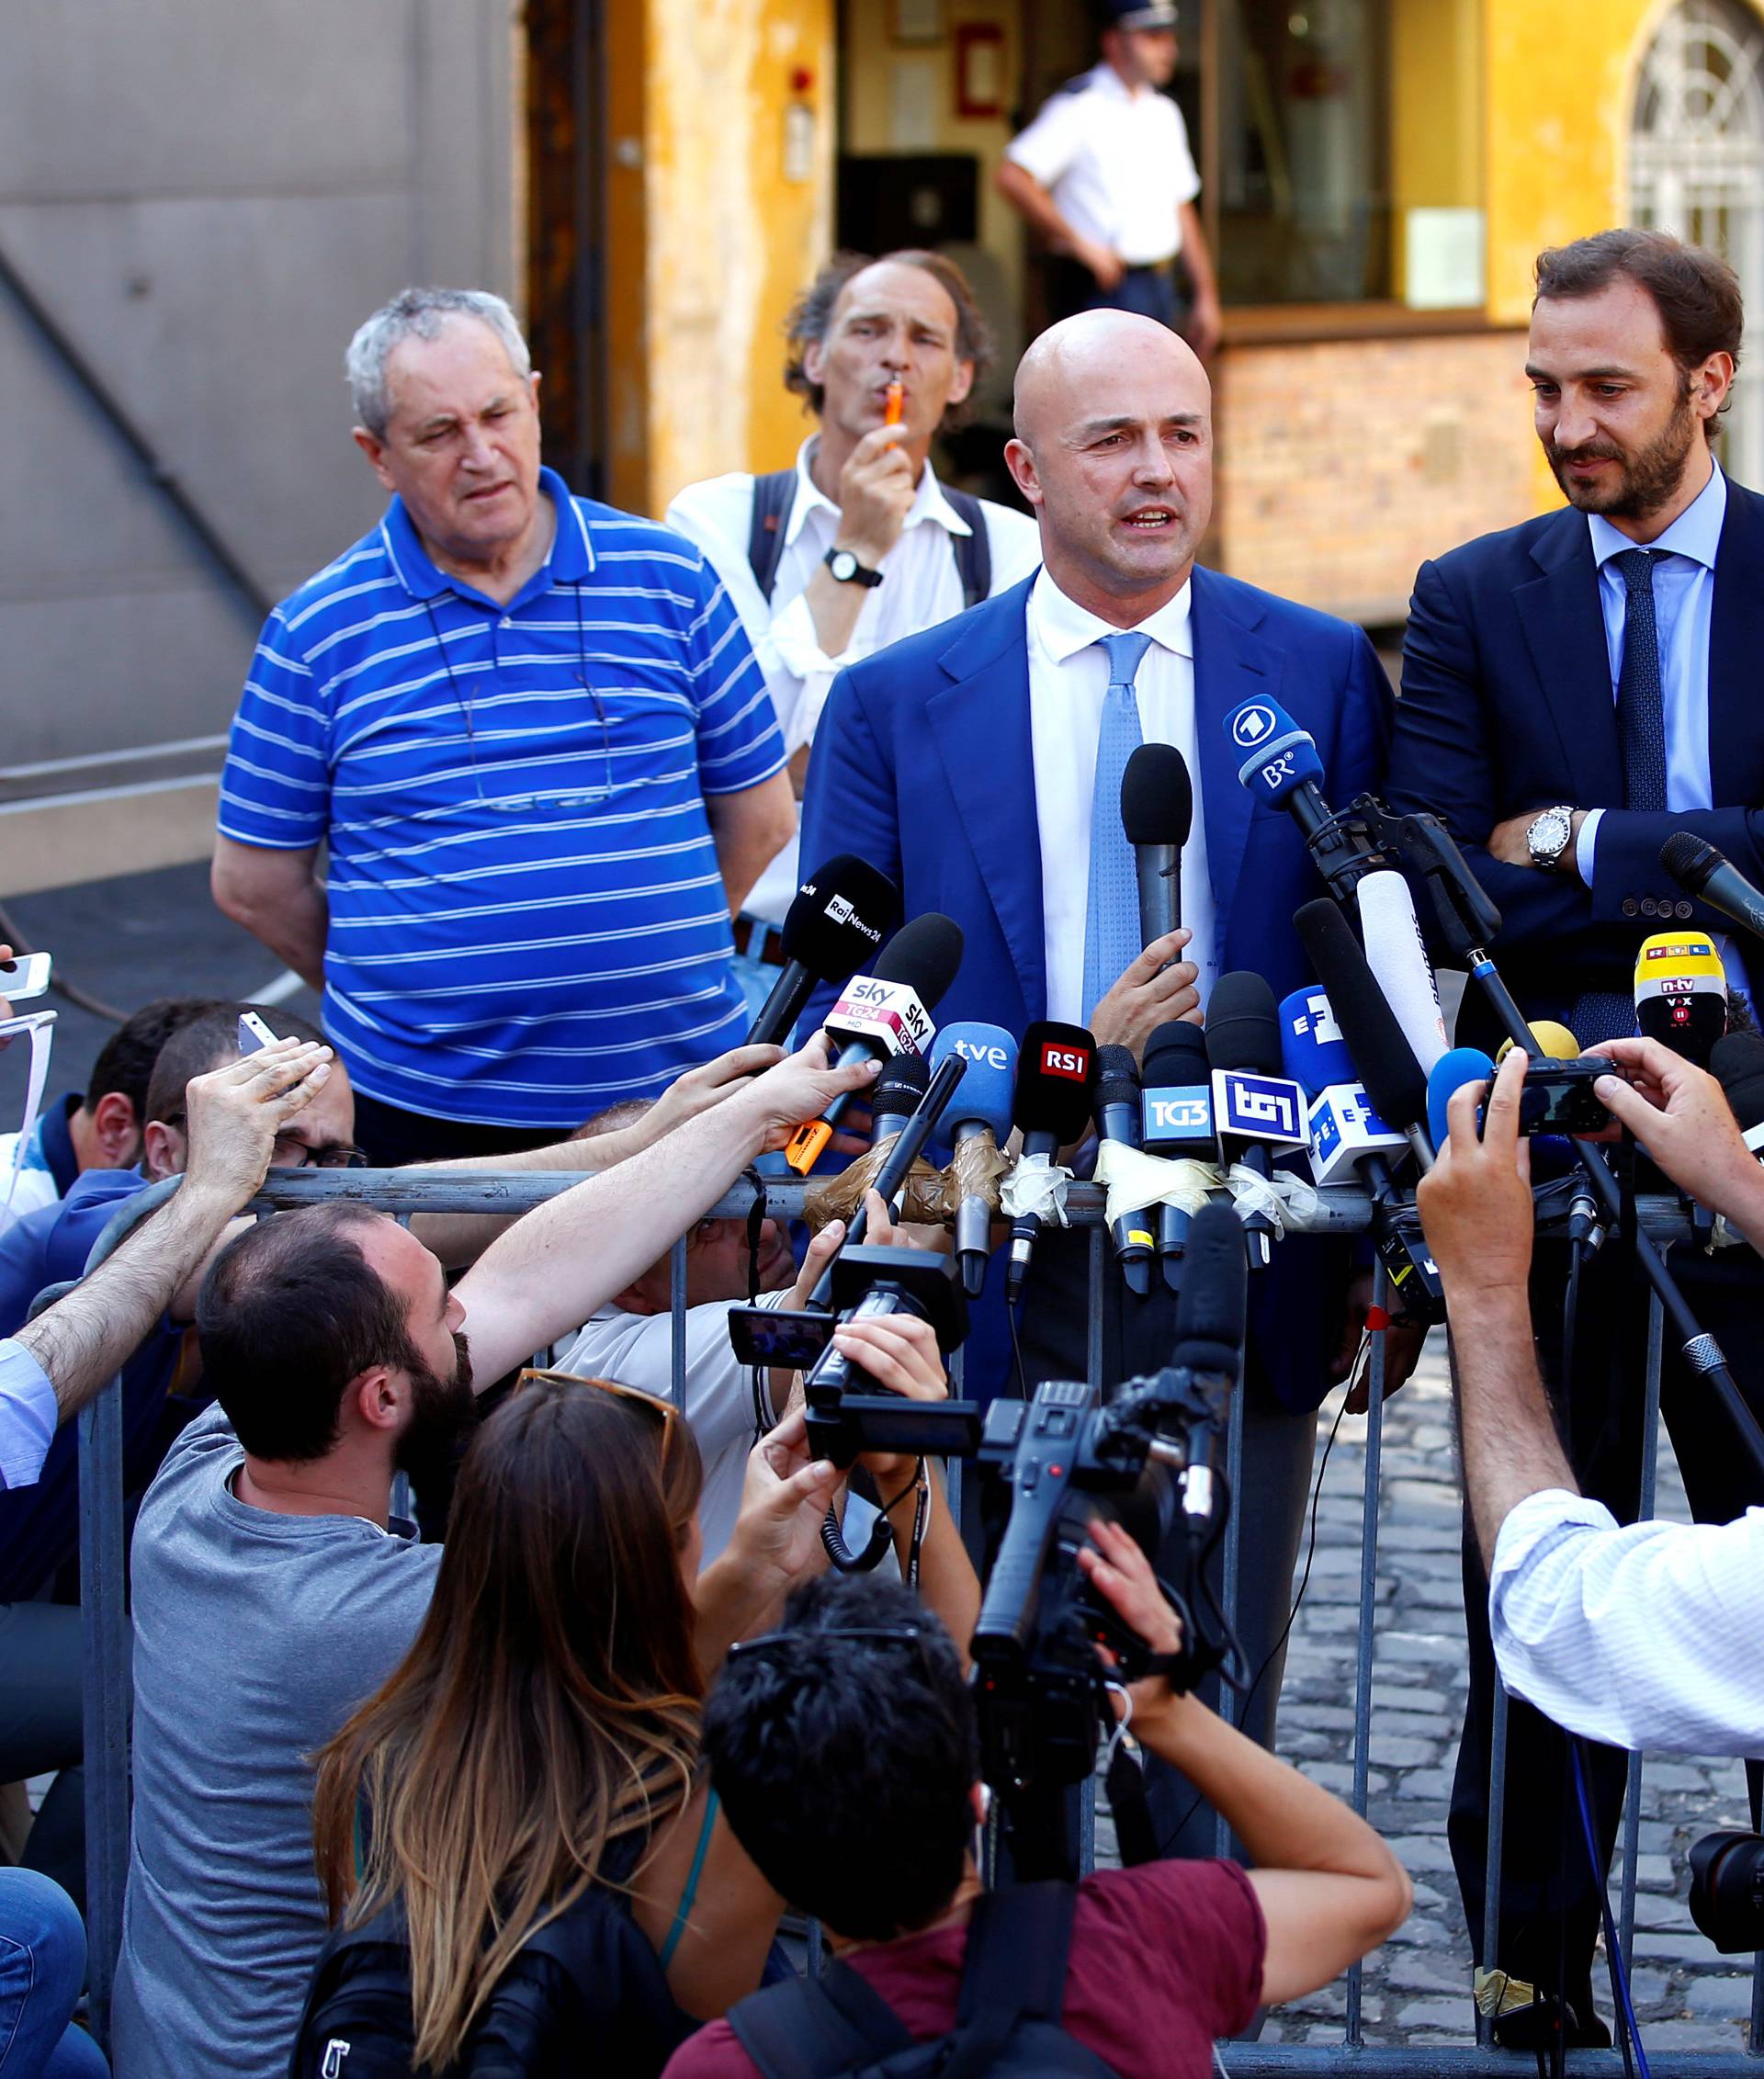 Journalists Fittipaldi and Nuzzi talk to reporters as they leave the Vatican at the end of their trial